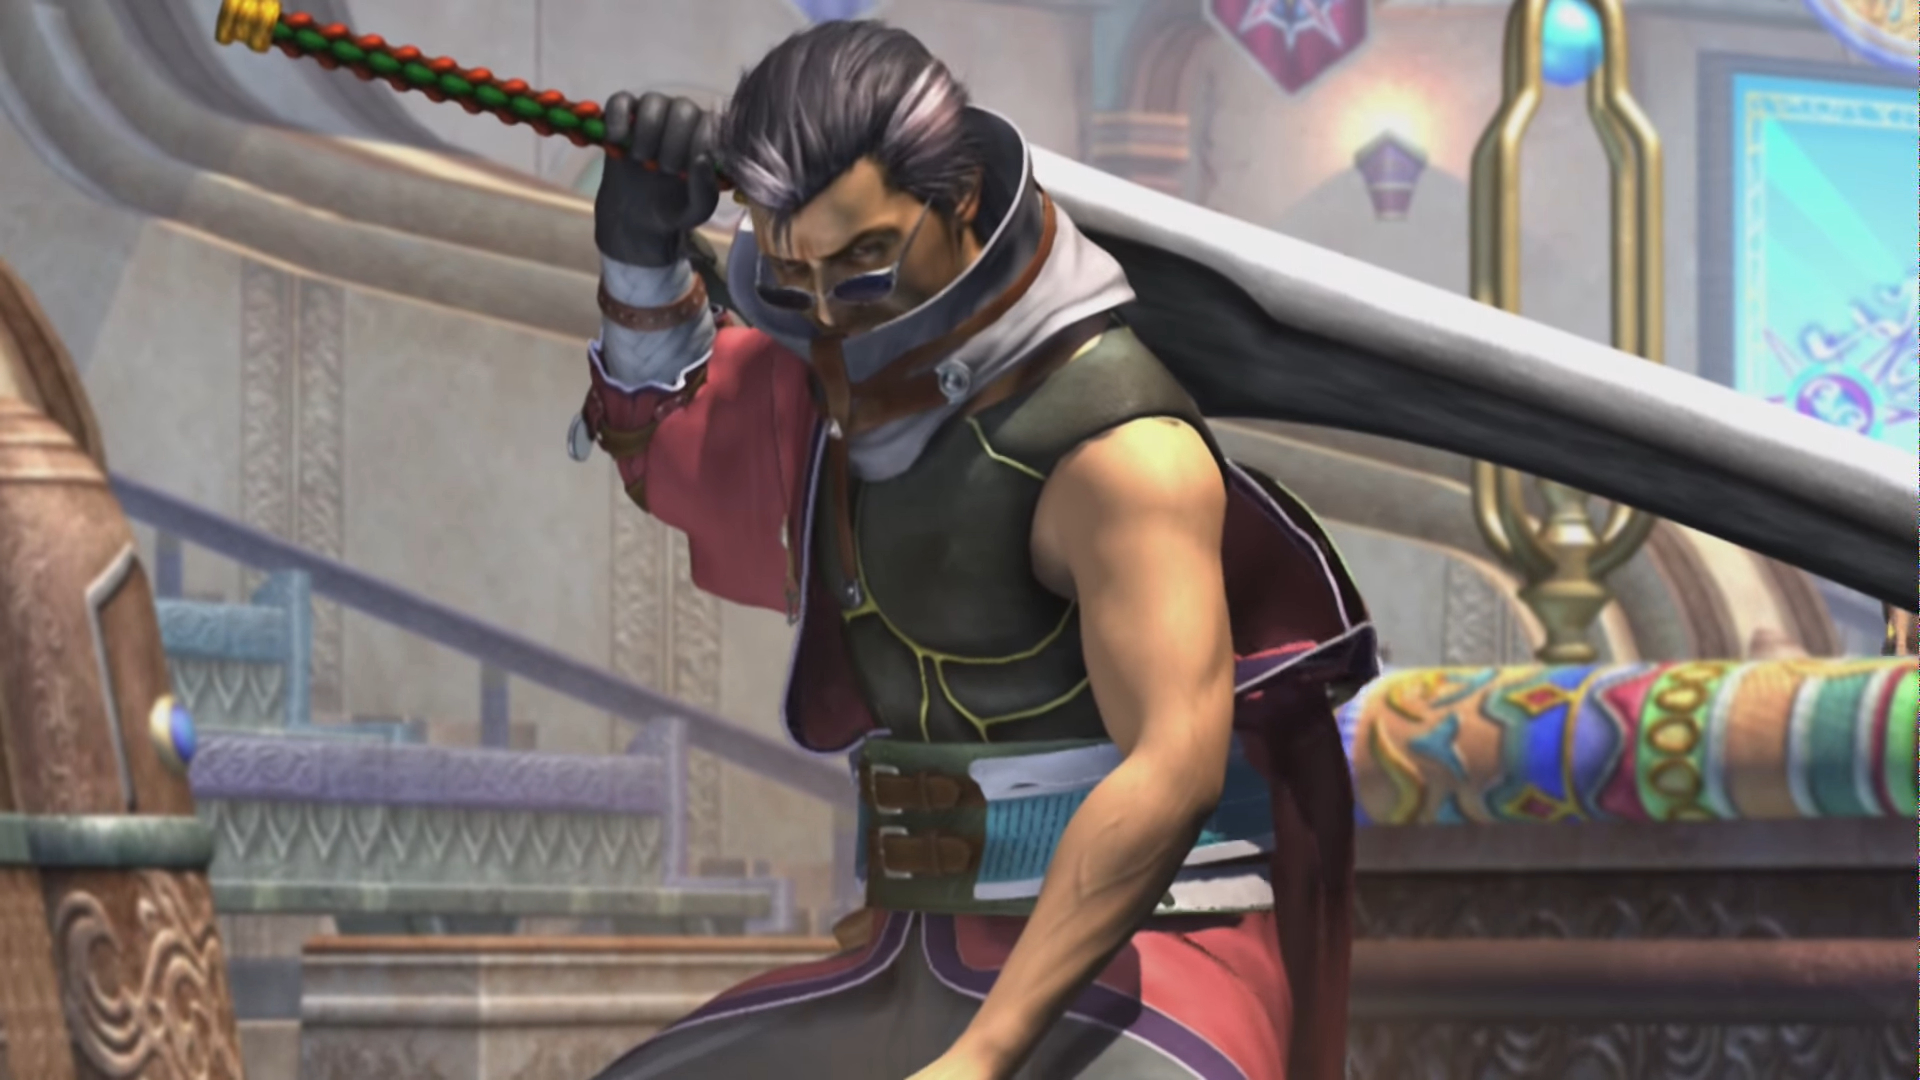 Auron looking super cool with his sword.